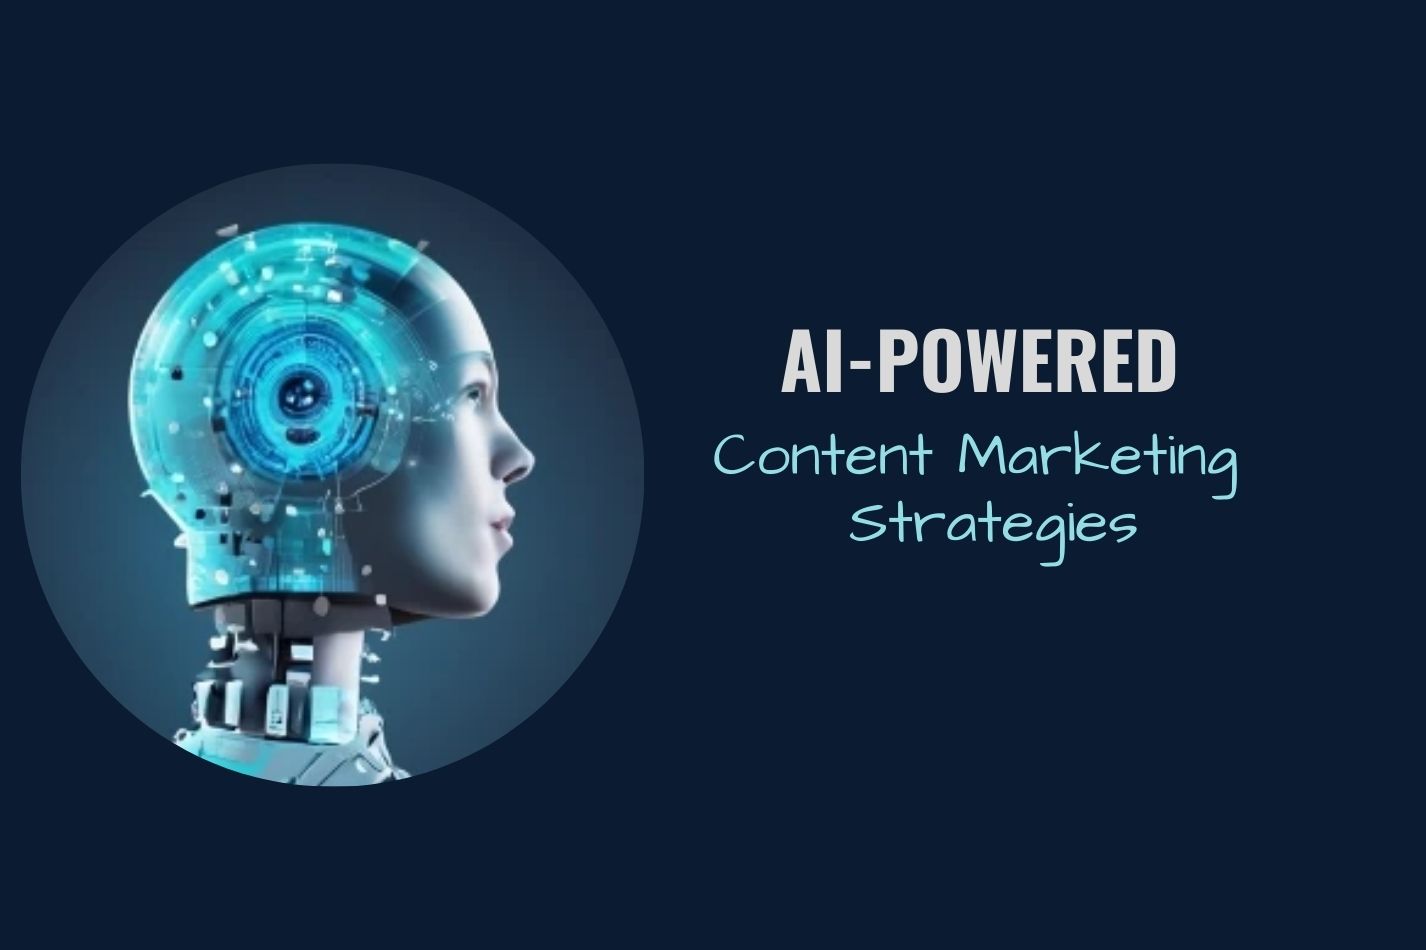 AI-powered content marketing